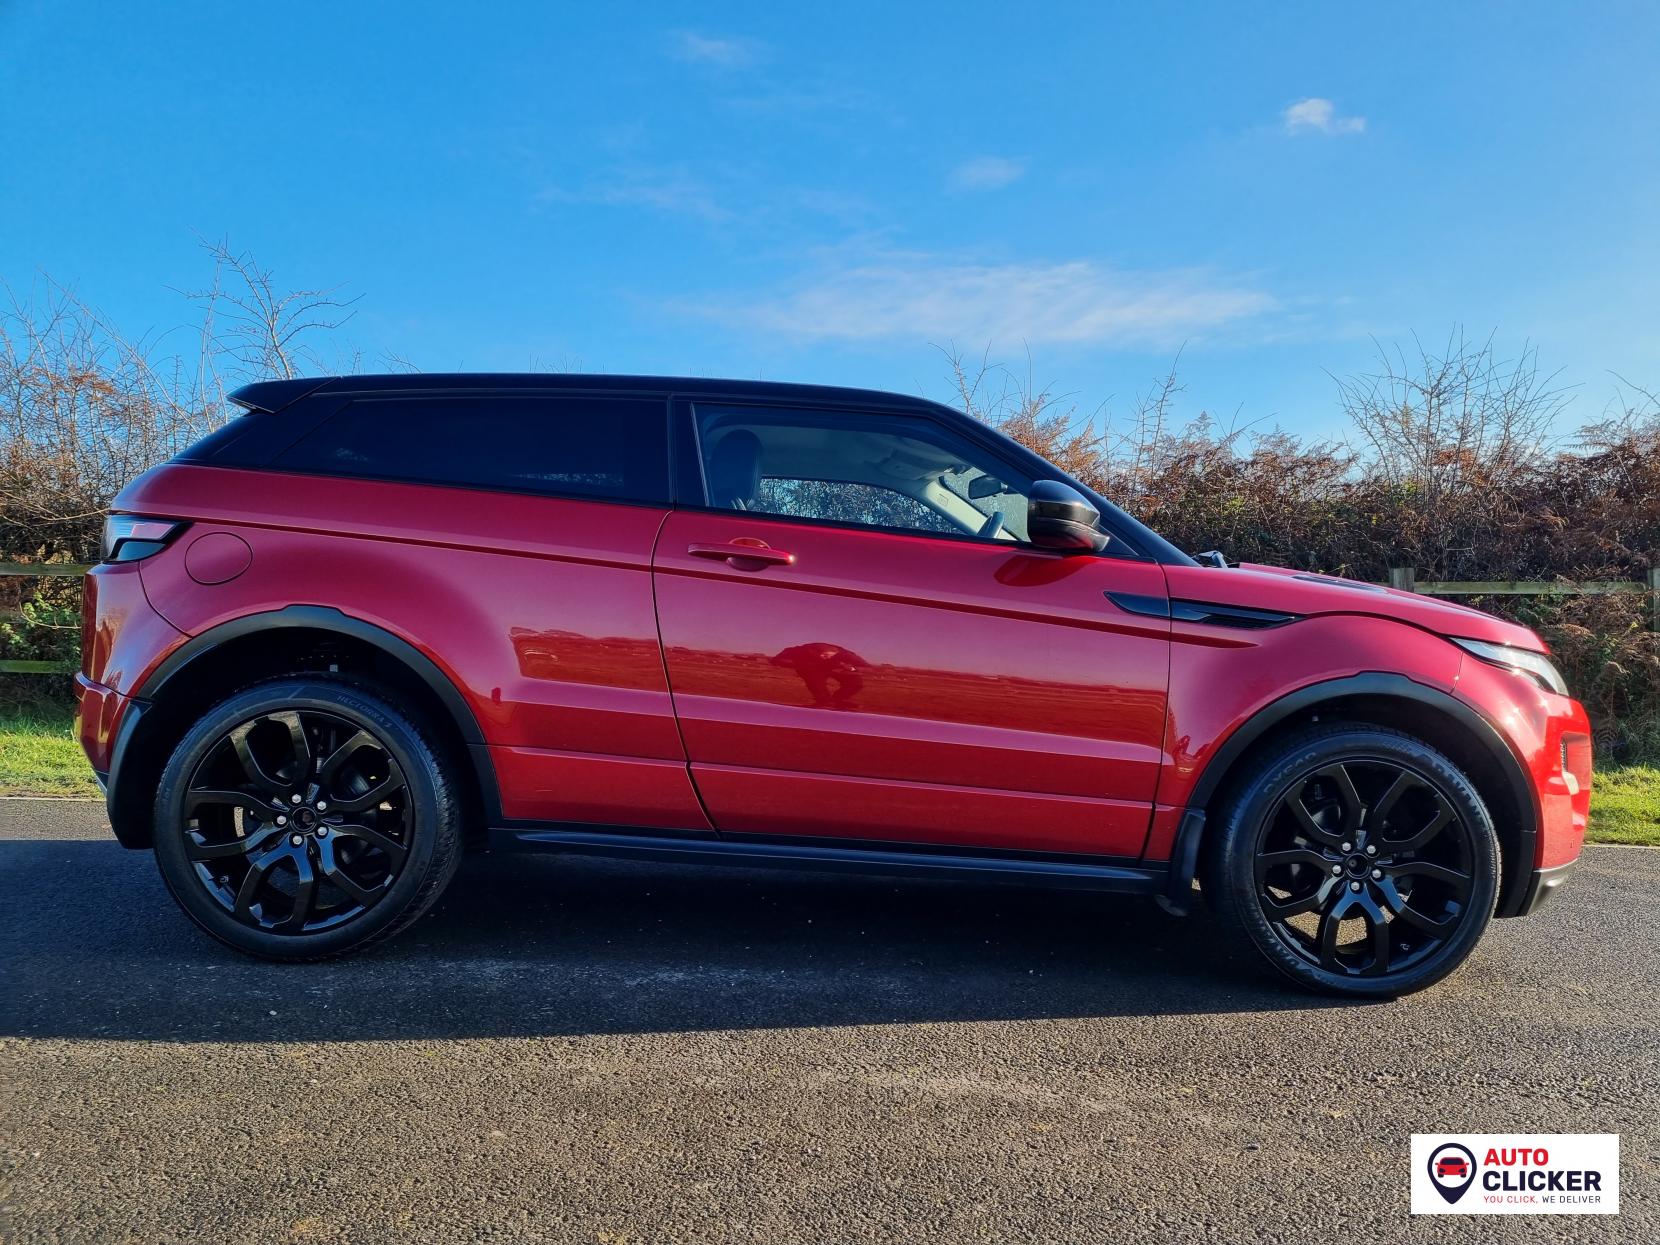 Land Rover Range Rover Evoque 2.2 SD4 Dynamic Coupe 3dr Diesel Manual 4WD Euro 5 (s/s) (190 ps)